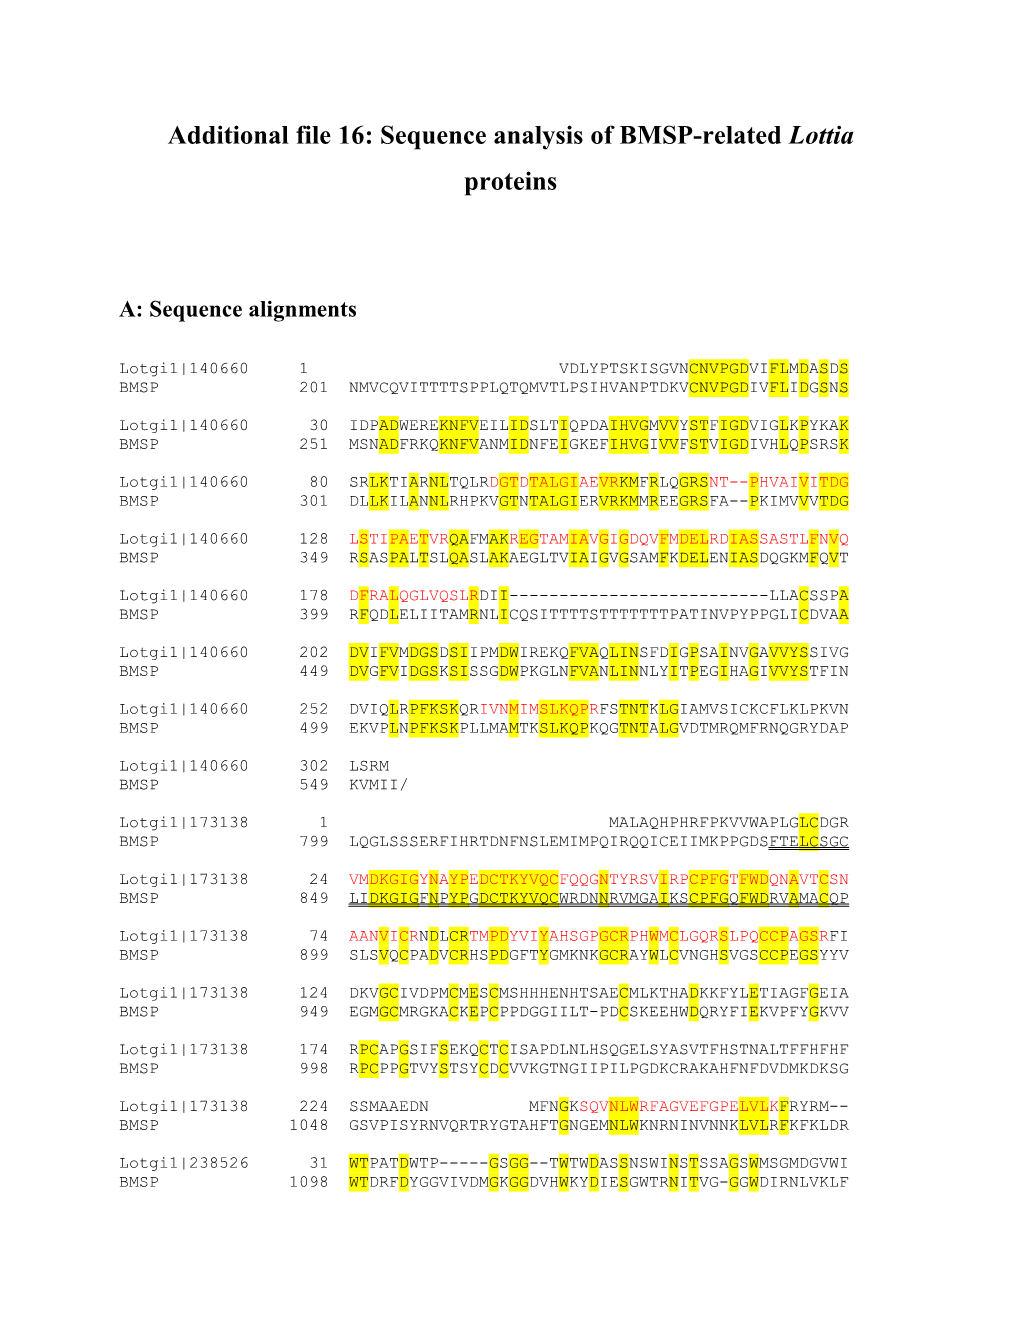 Additional File 16: Sequence Analysis of BMSP-Related Lottia Proteins